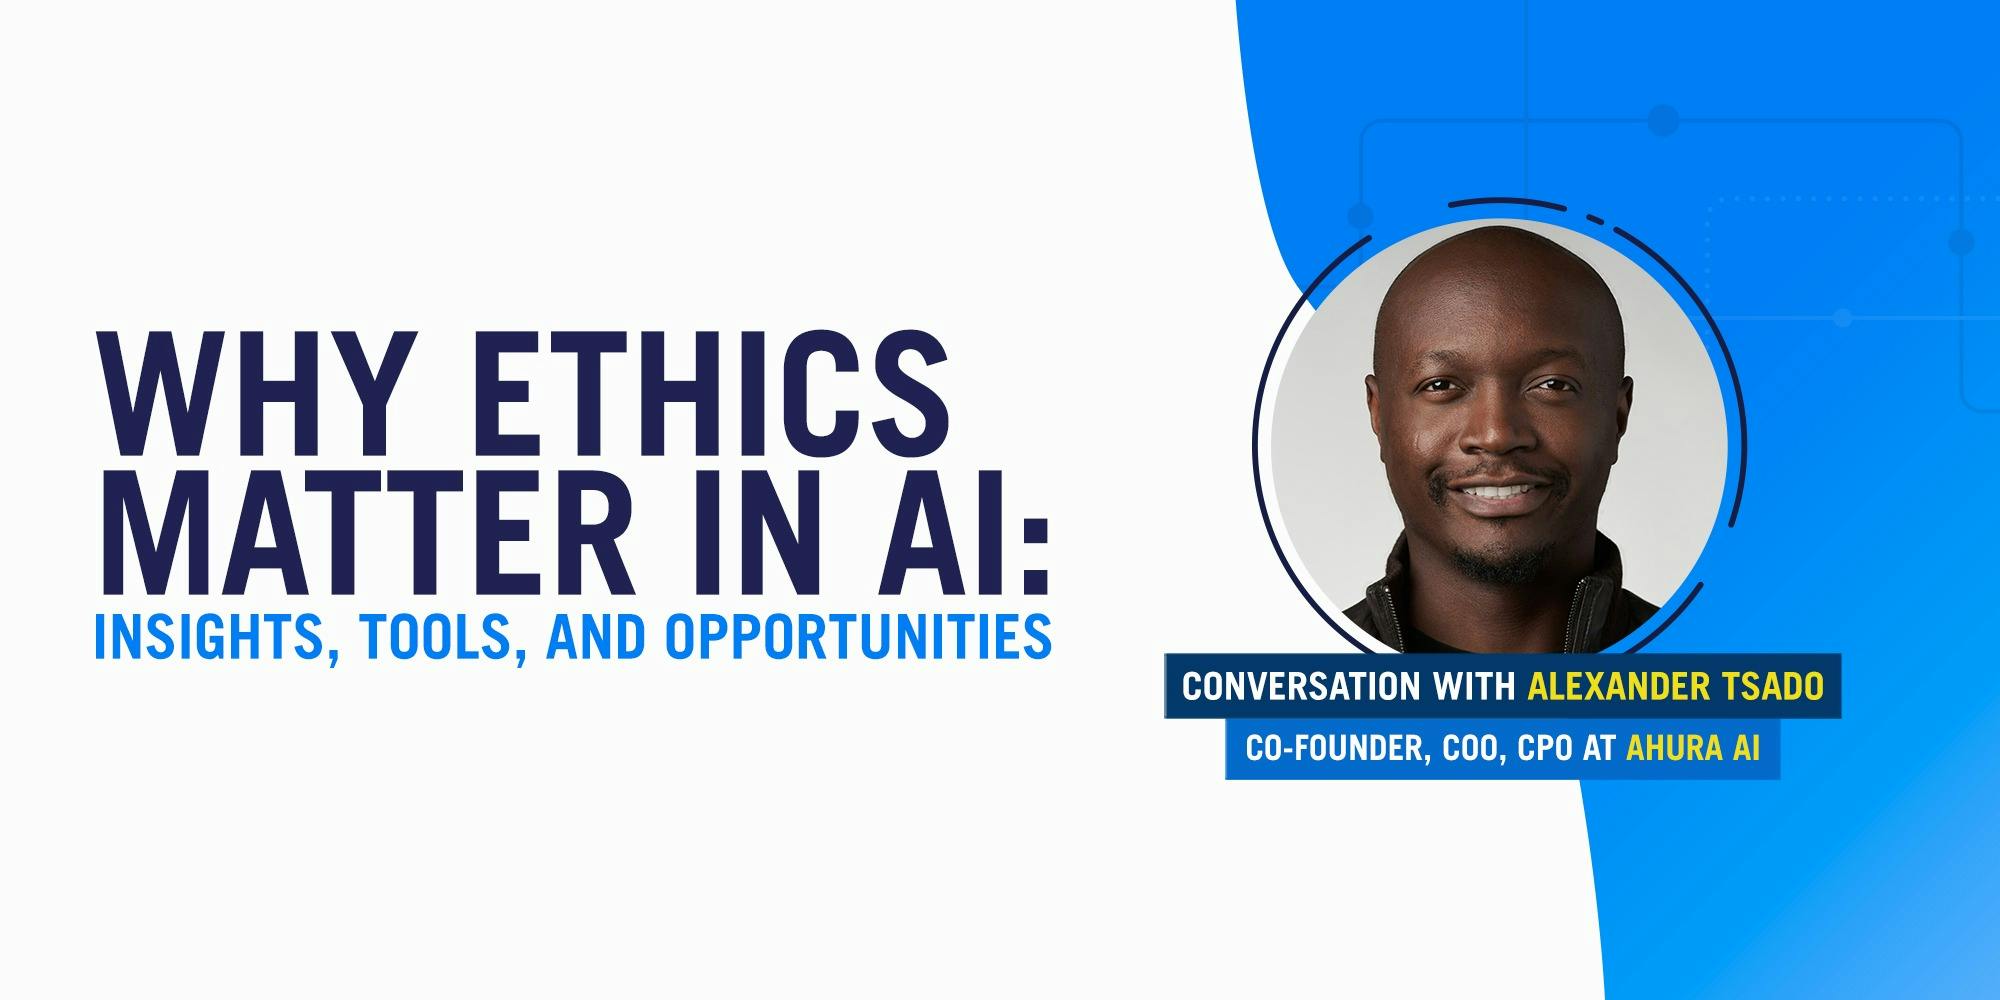 Why Ethics Matter in AI: Insights, Tools, and Opportunities